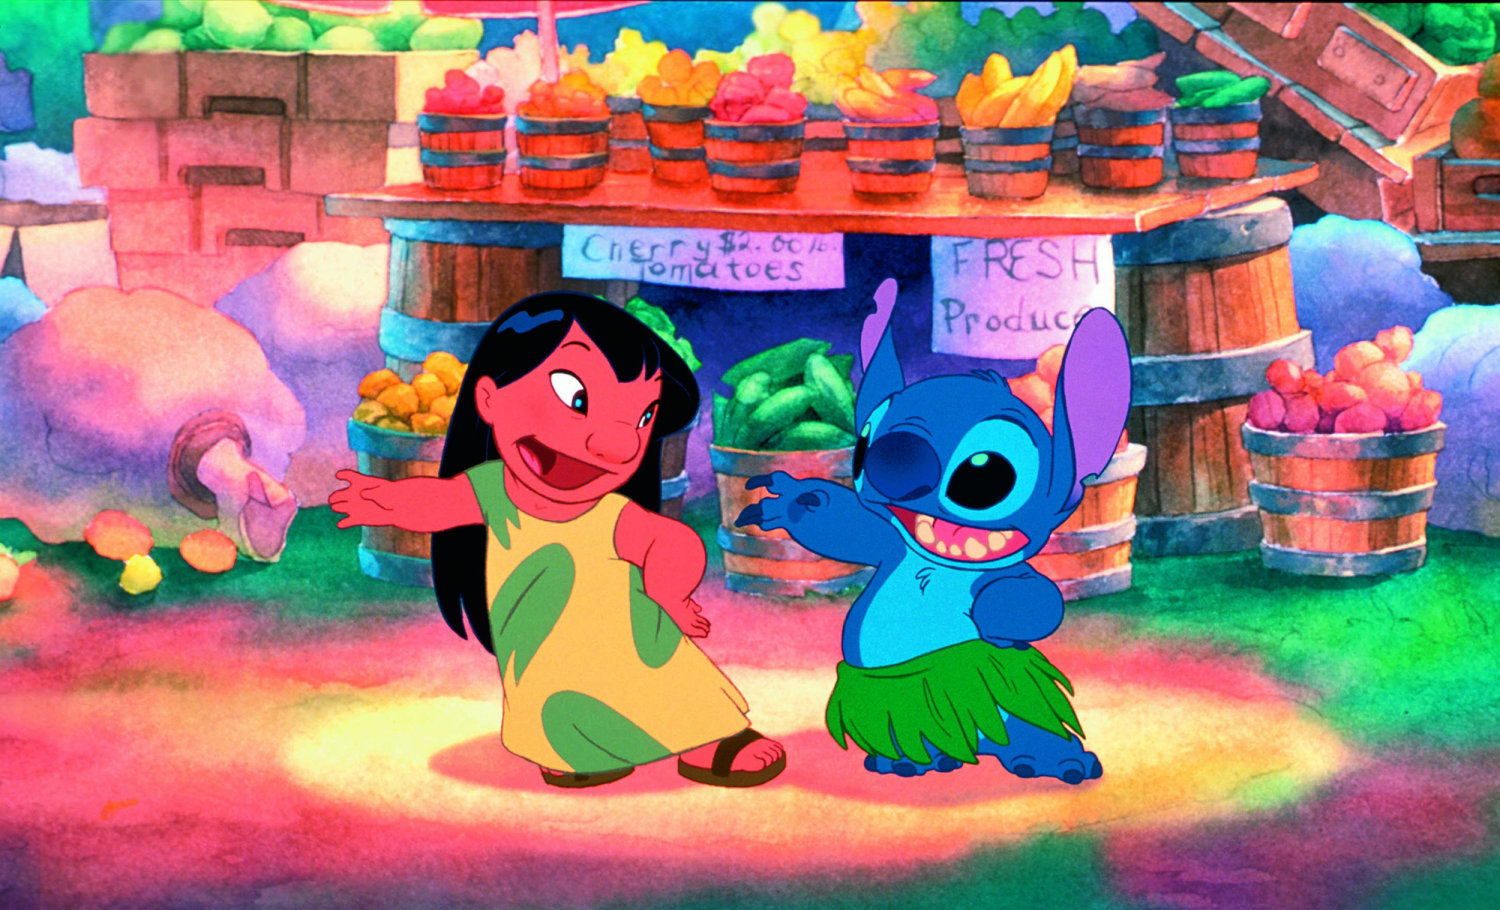 Lilo & Stitch Should Get Another Sequel, Not a Live-Action Remake